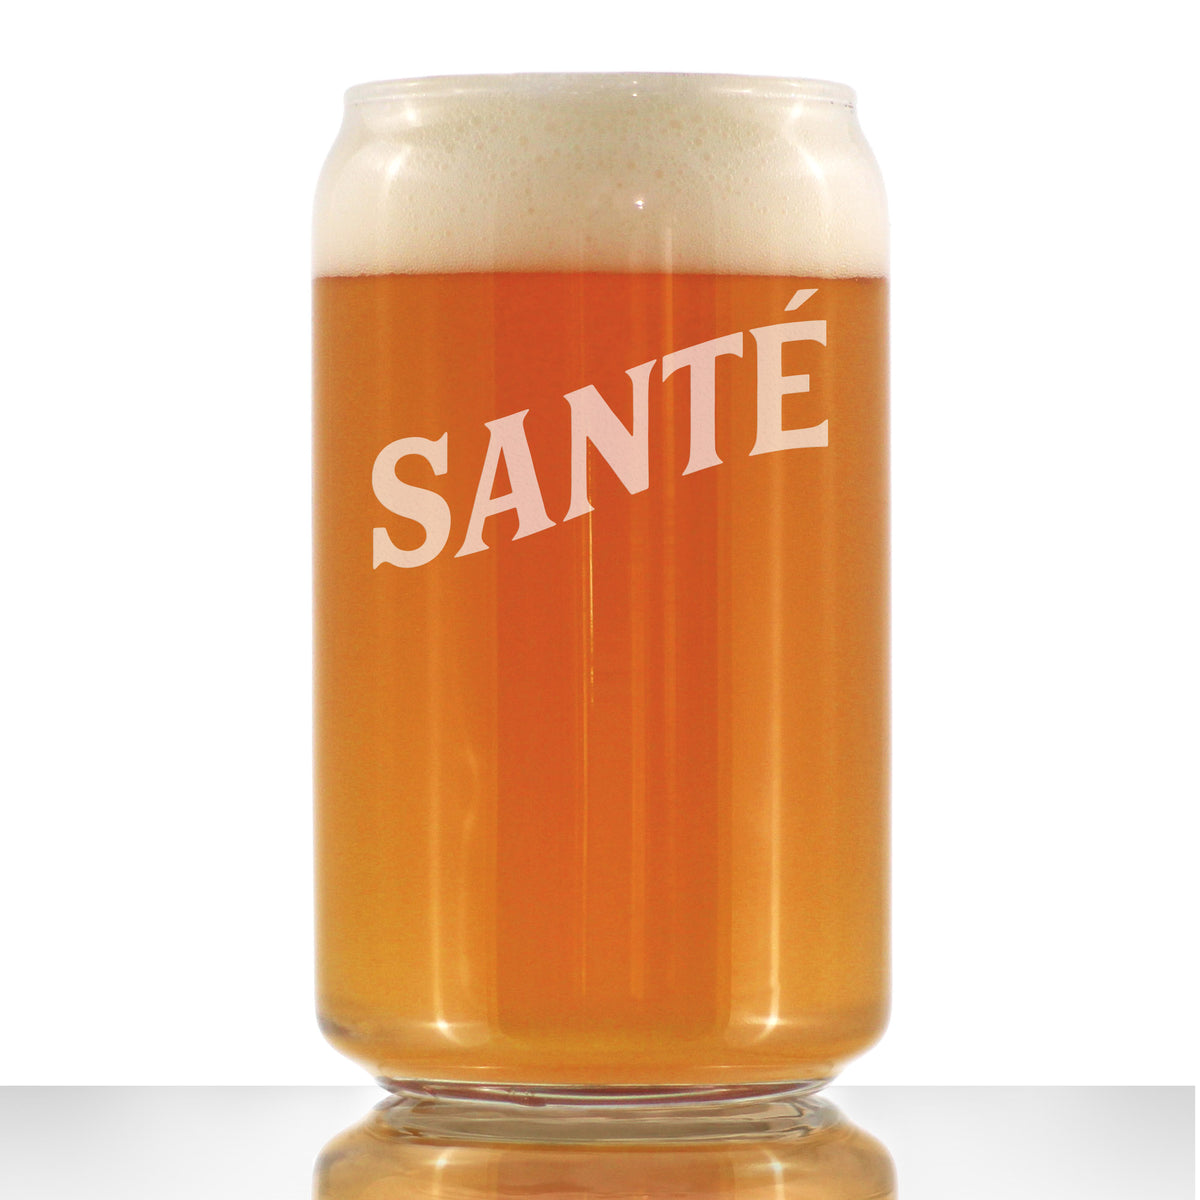 Sante - French Cheers - Fun Beer Can Pint Glasses - Cute France Themed Gifts or Party Decor for Men and Women - 16 oz